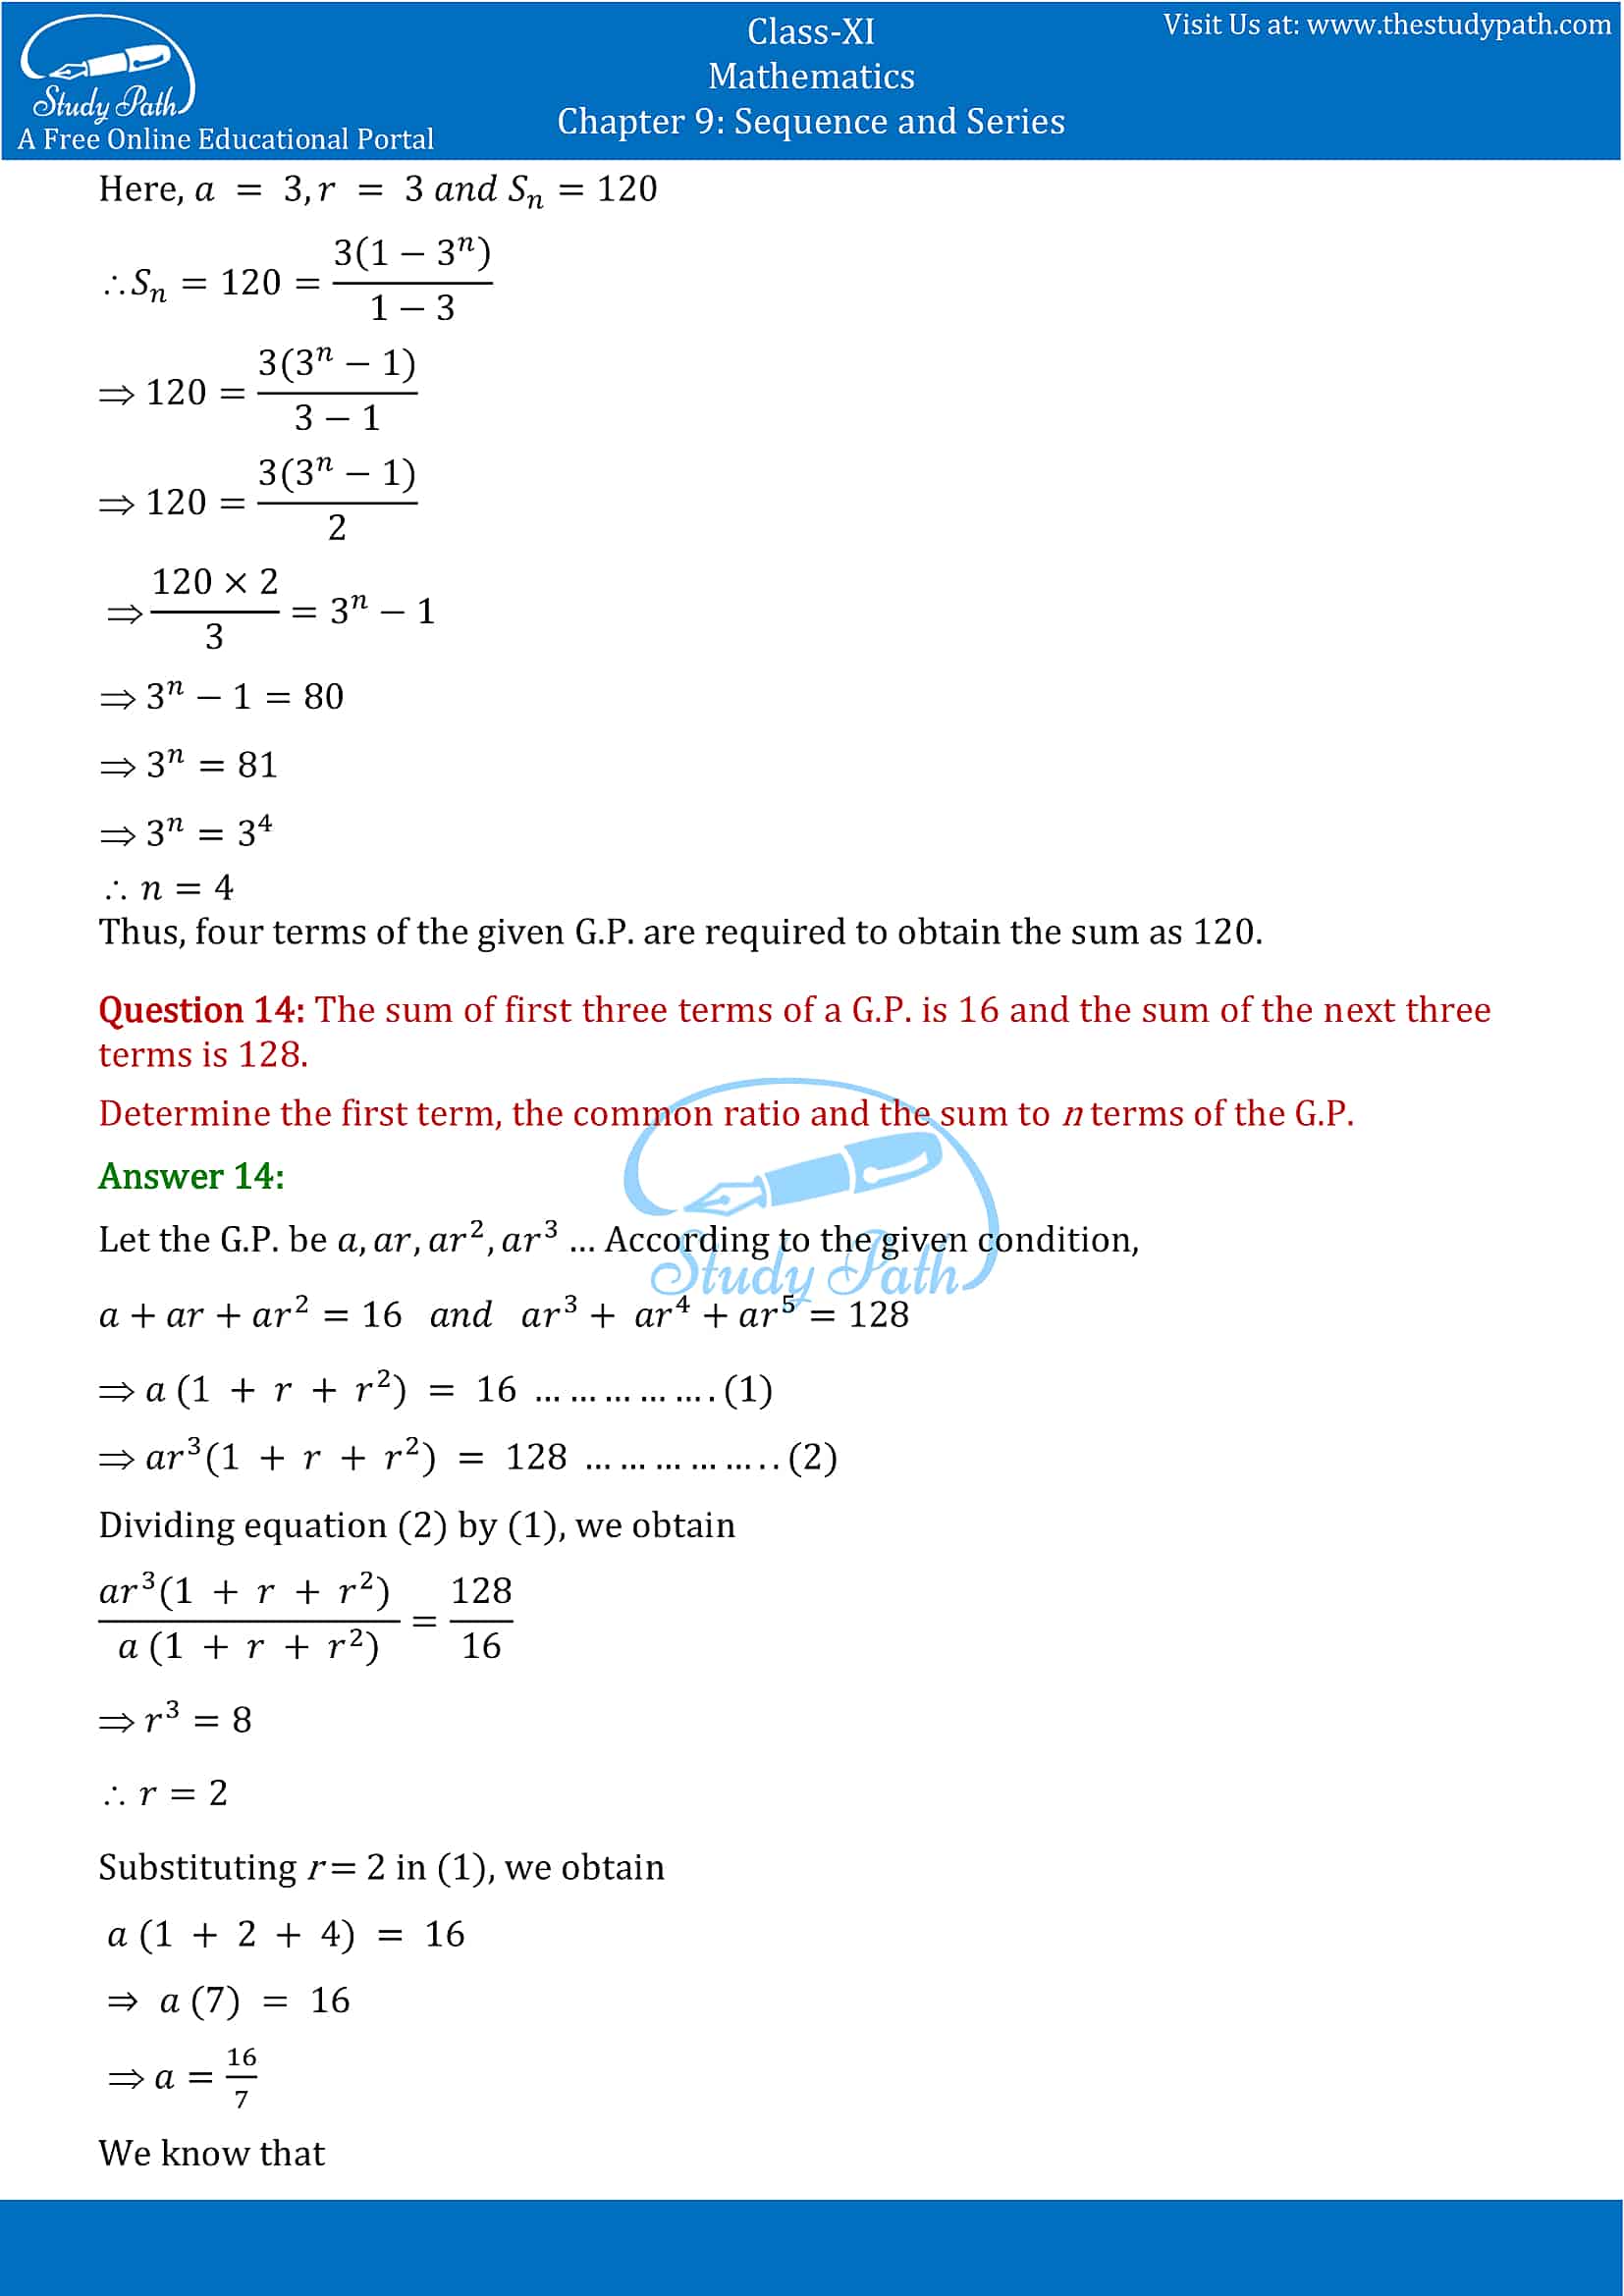 NCERT Solutions for Class 11 Maths chapter 9 Sequence and Series Exercise 9.3 Part-8